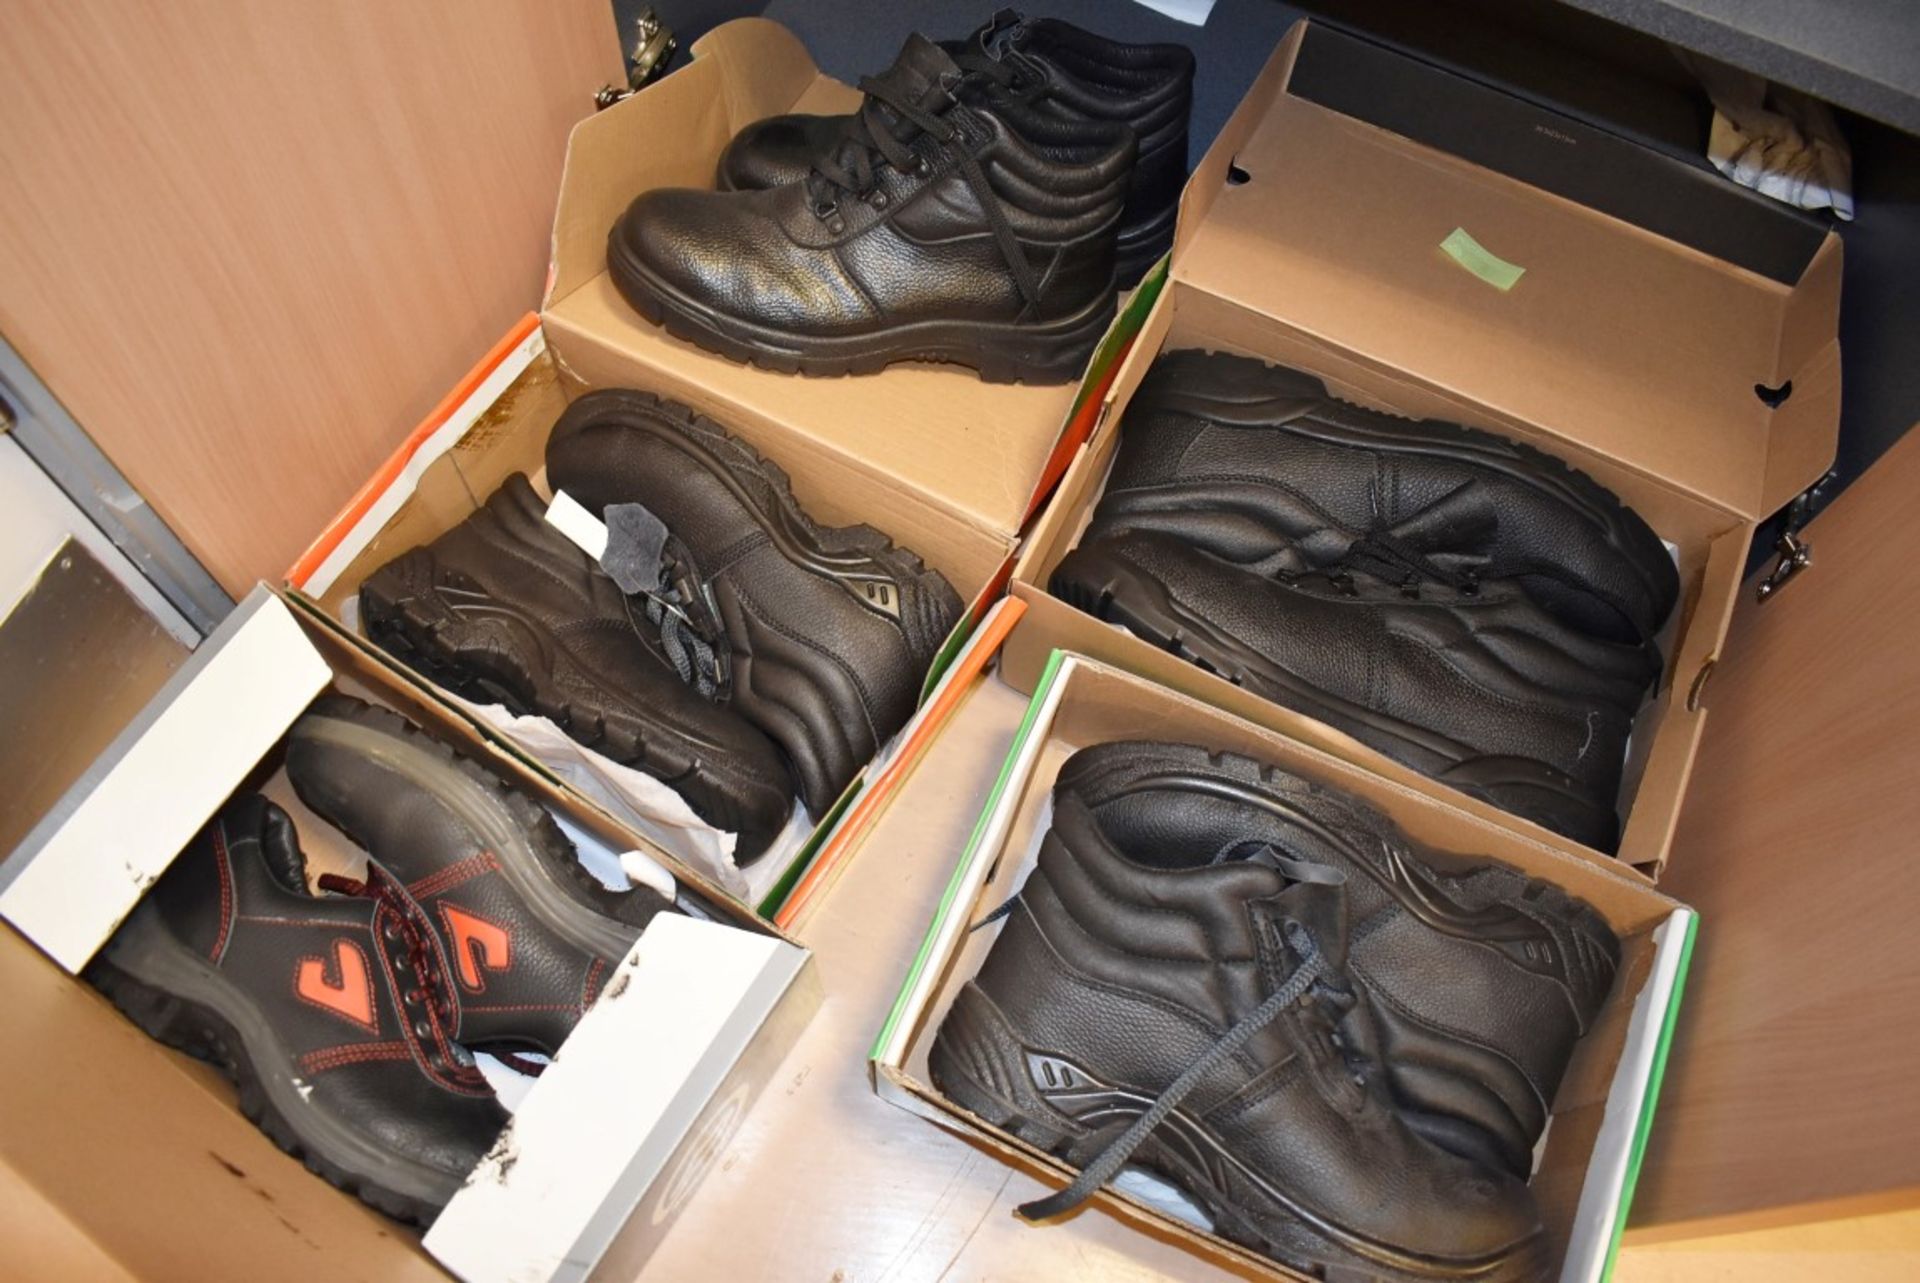 5 x Pairs of Safety Work Boots With Boxes - Various Styles and Sizes Included